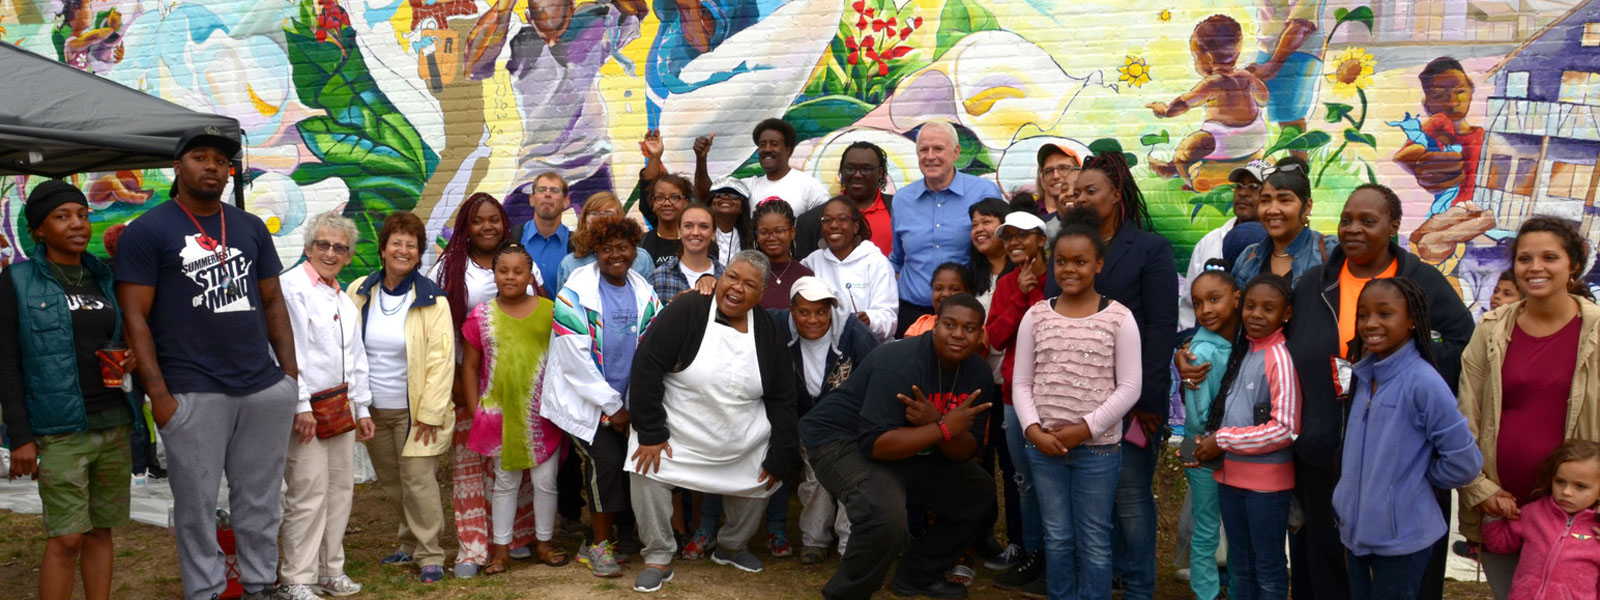 large group of people standing in front of mural